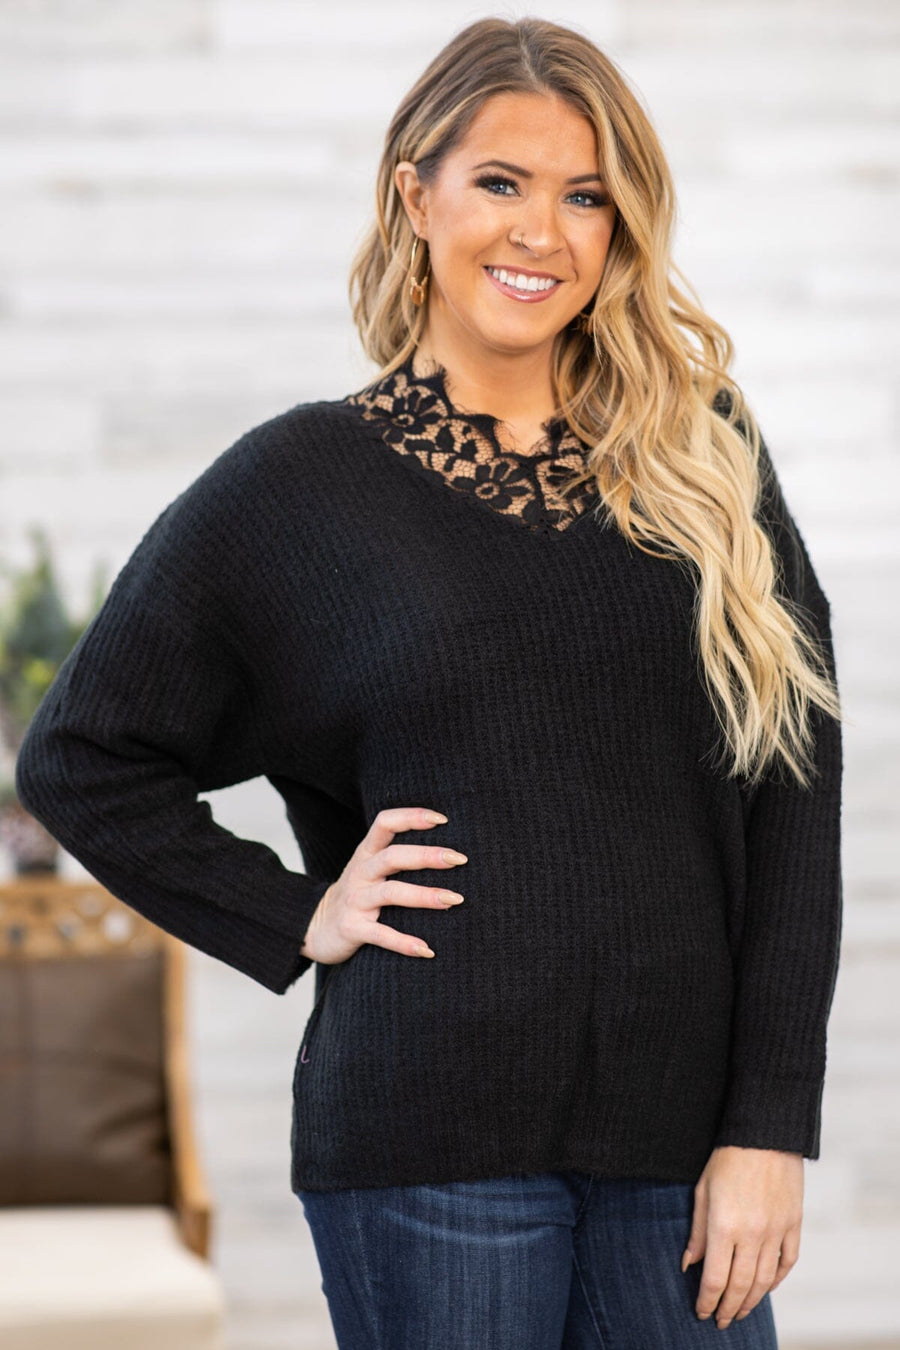 Black Lace Trim Rib Knit Sweater - Filly Flair